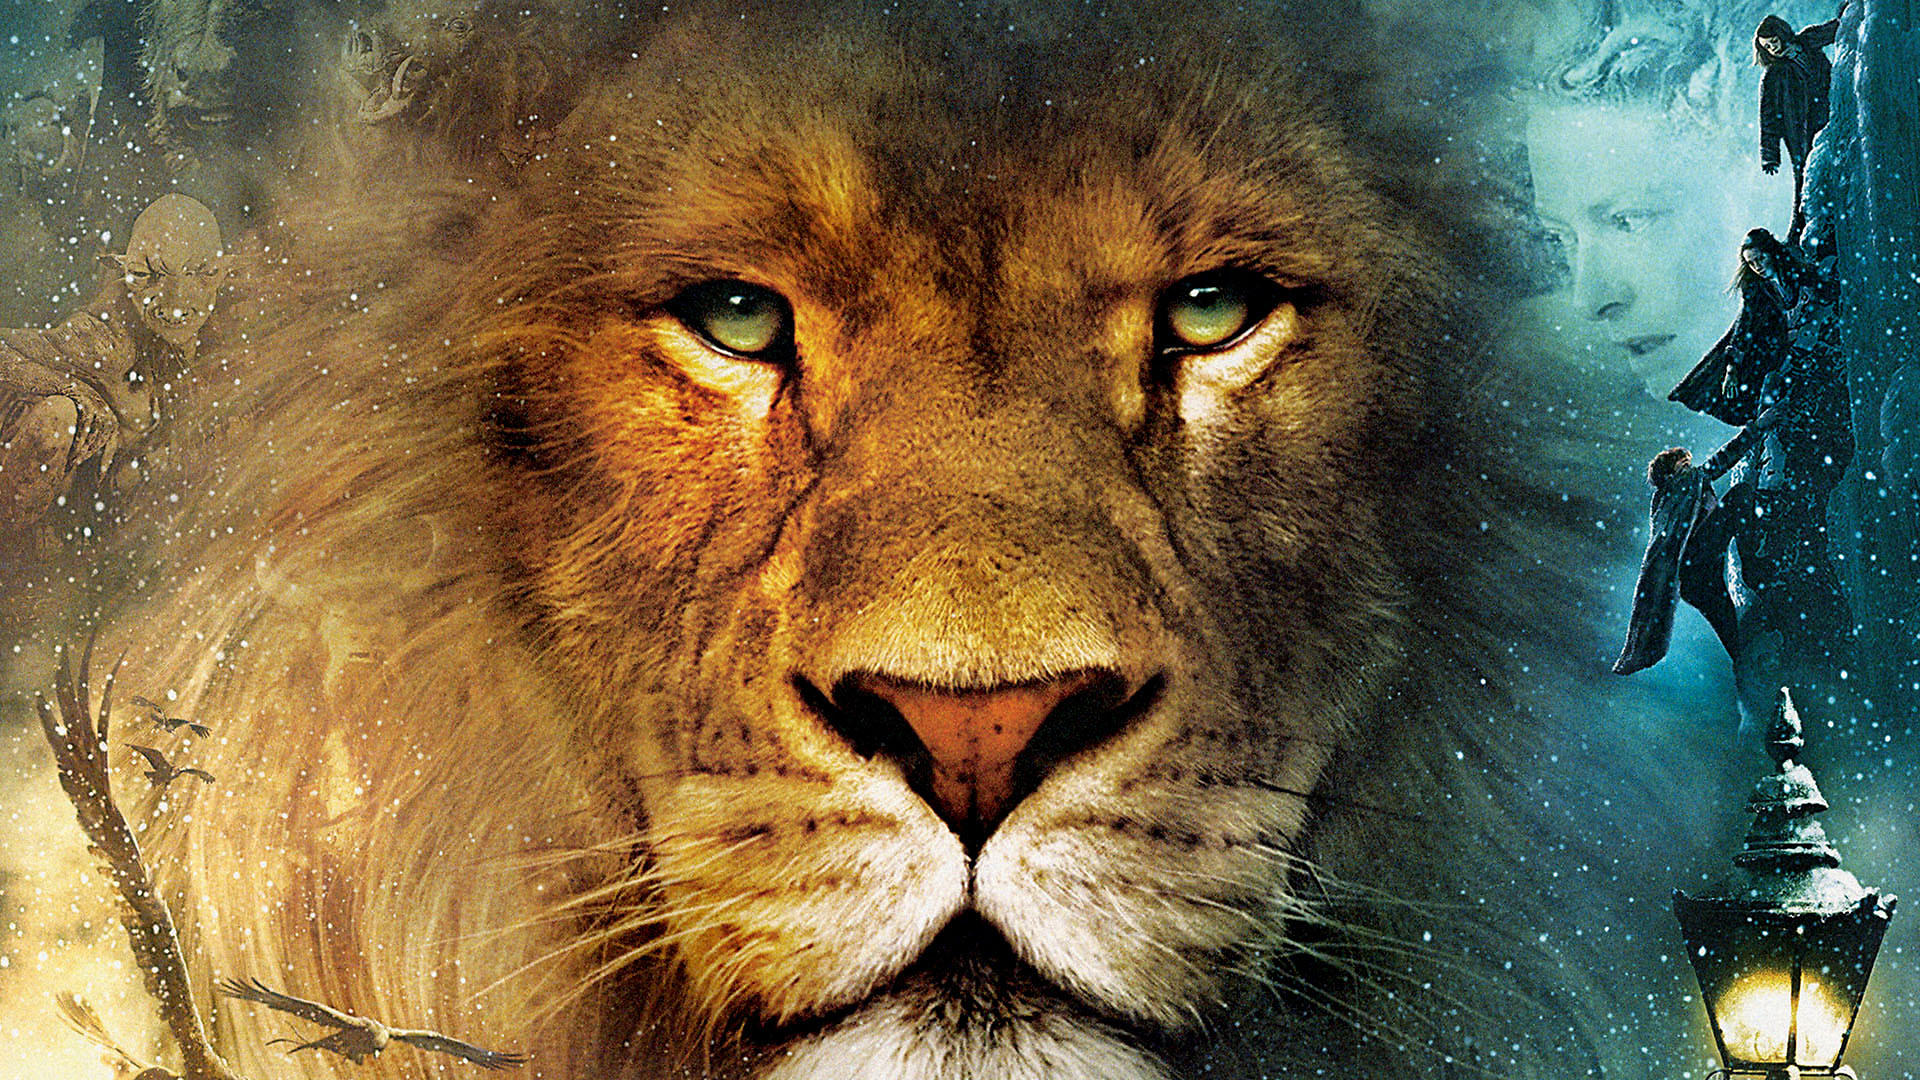 Movie The Chronicles of Narnia: The Lion, the Witch and the Wardrobe HD Wallpaper | Background Image